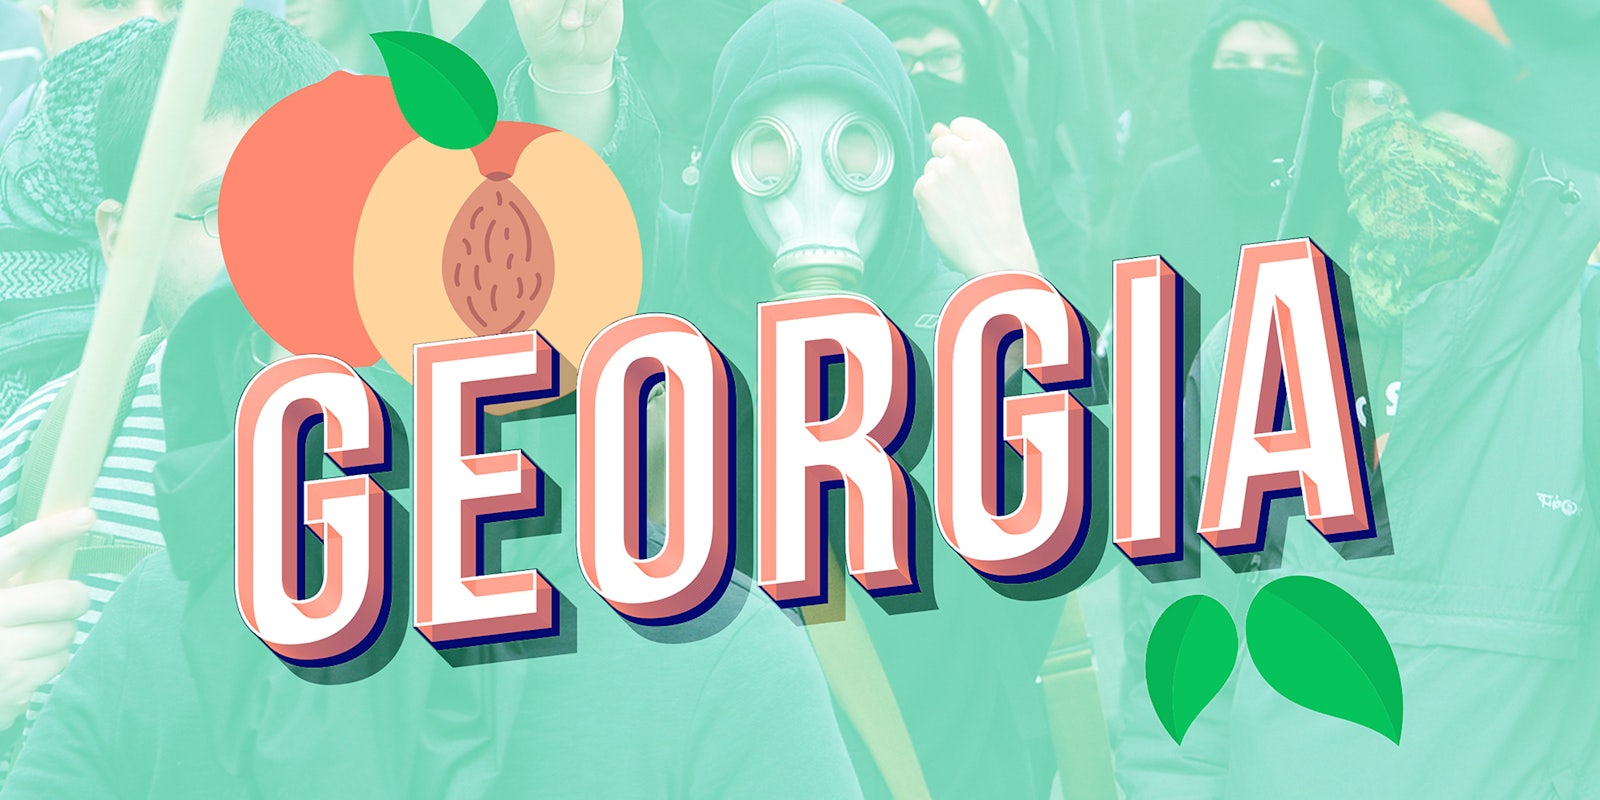 Antifacist protesters behind text that says 'Georgia' and illustration of a peach and leaves